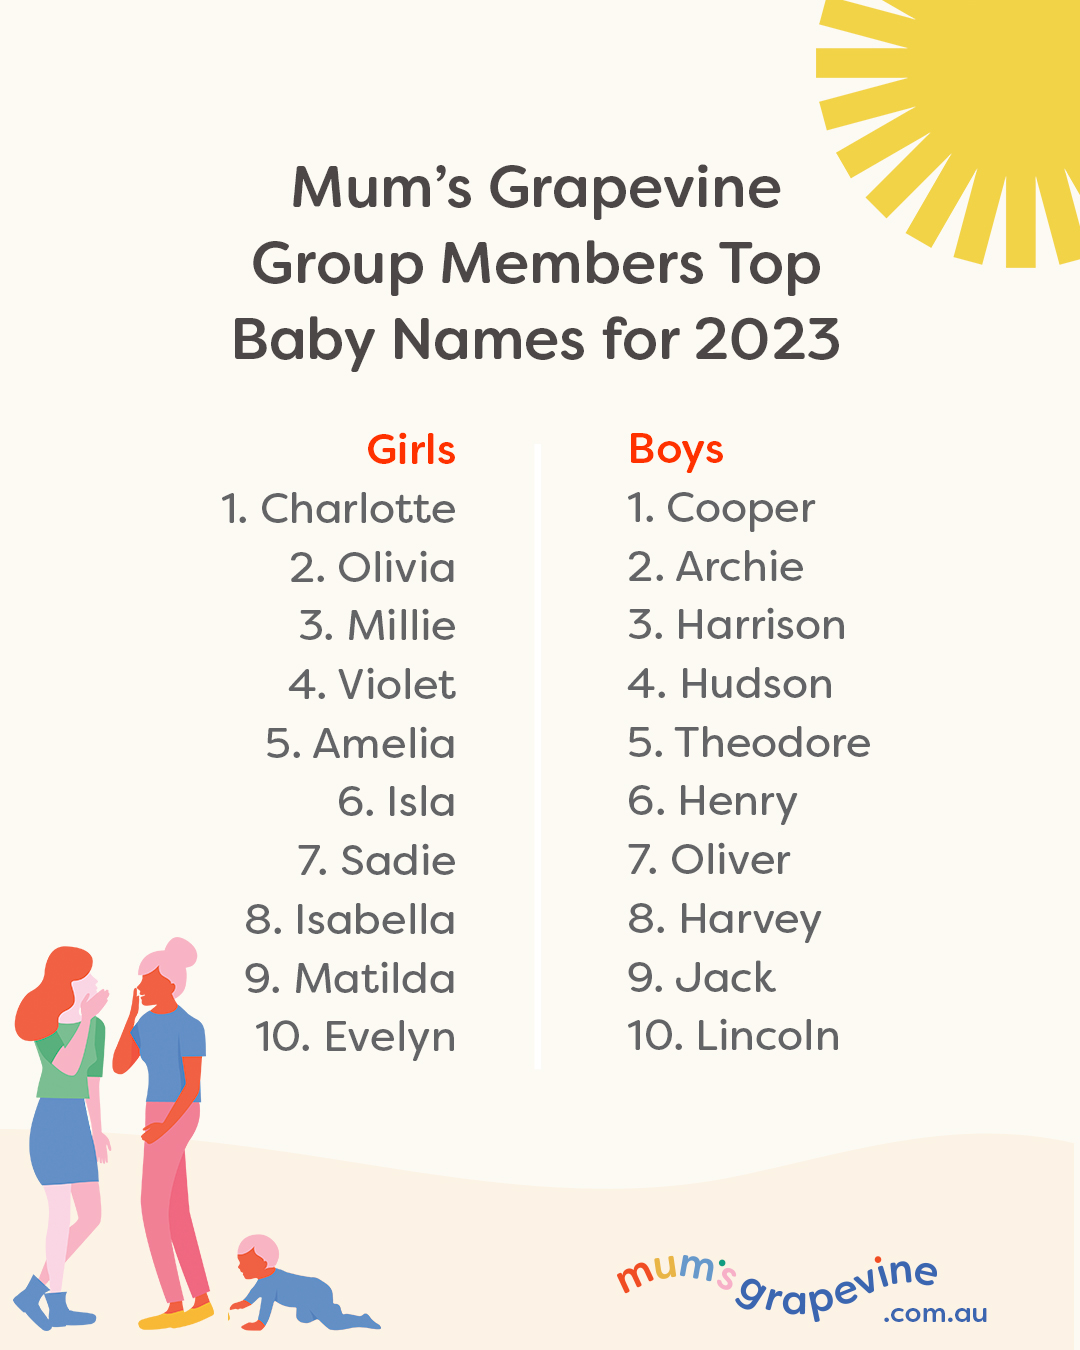 Mum's Grapevine Community Top Baby Names for 2023